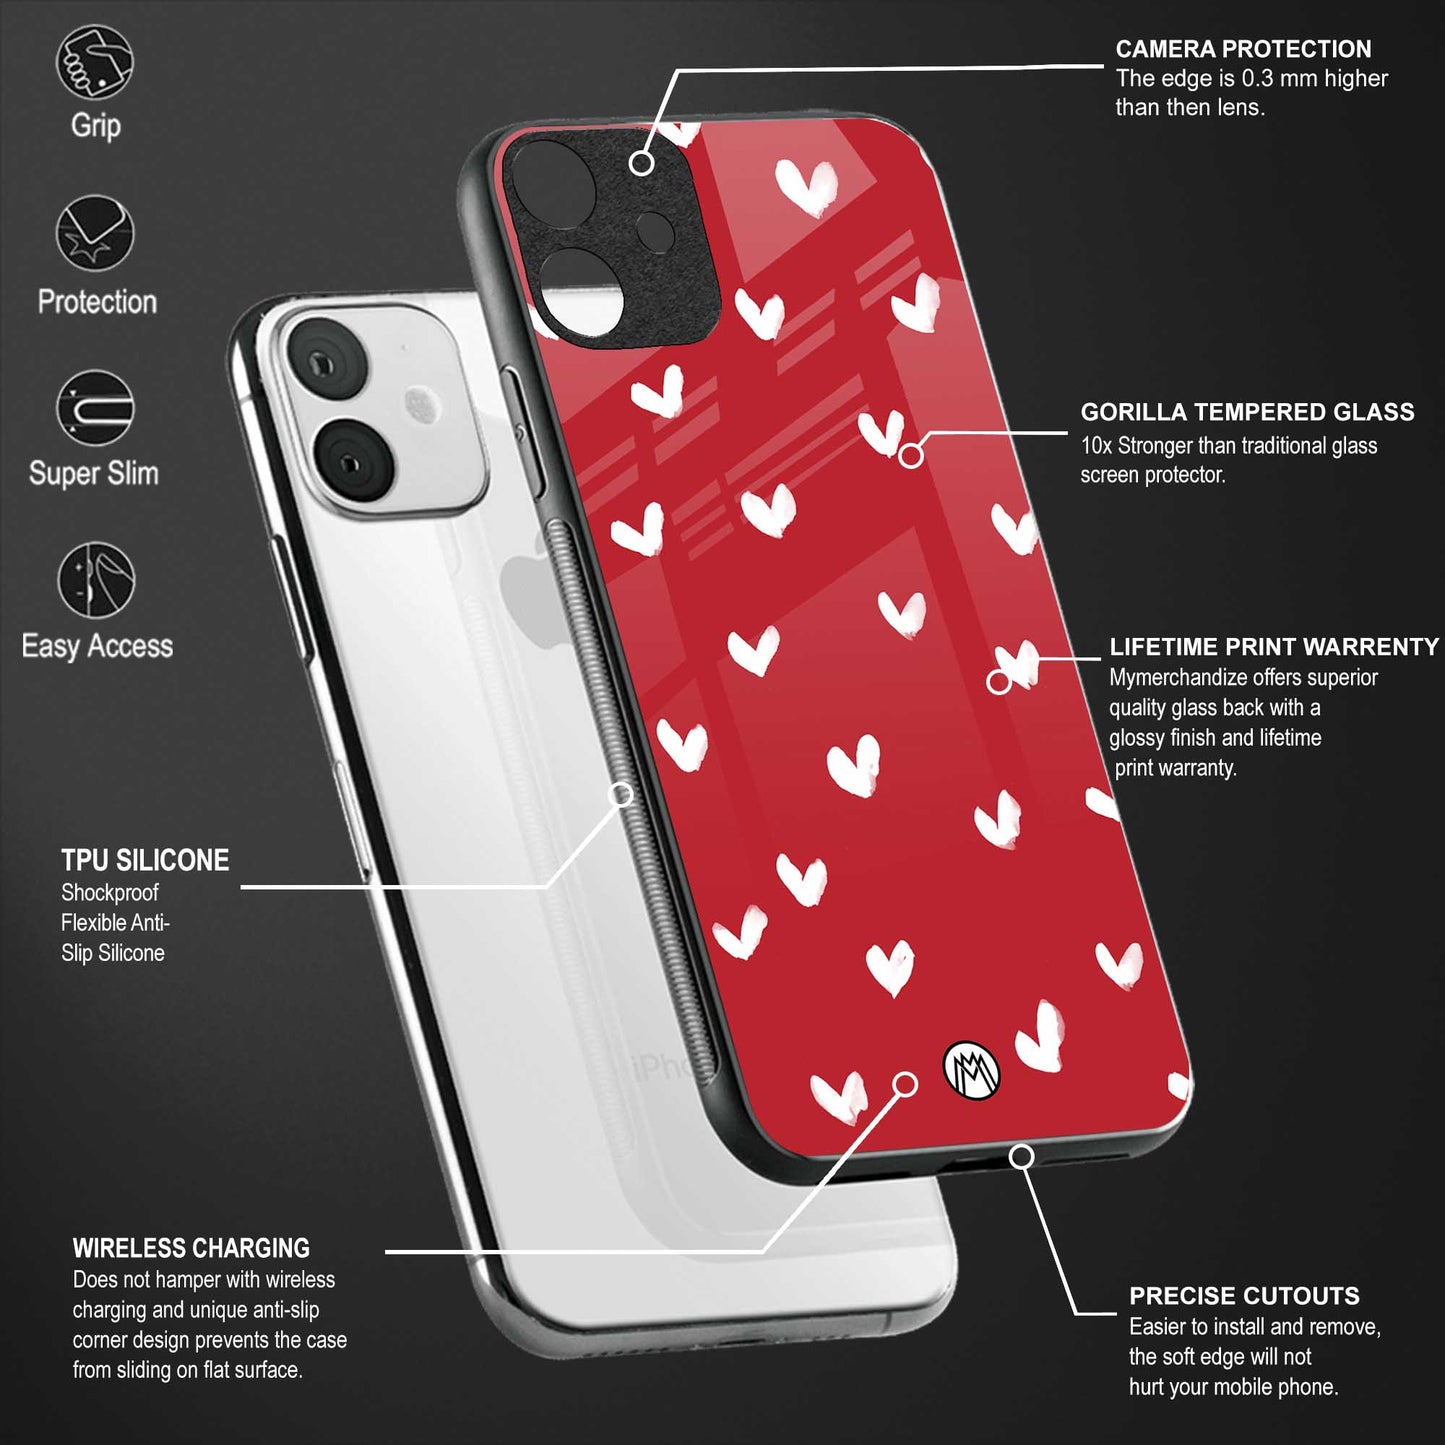 love is love red edition back phone cover | glass case for redmi note 11 pro plus 4g/5g